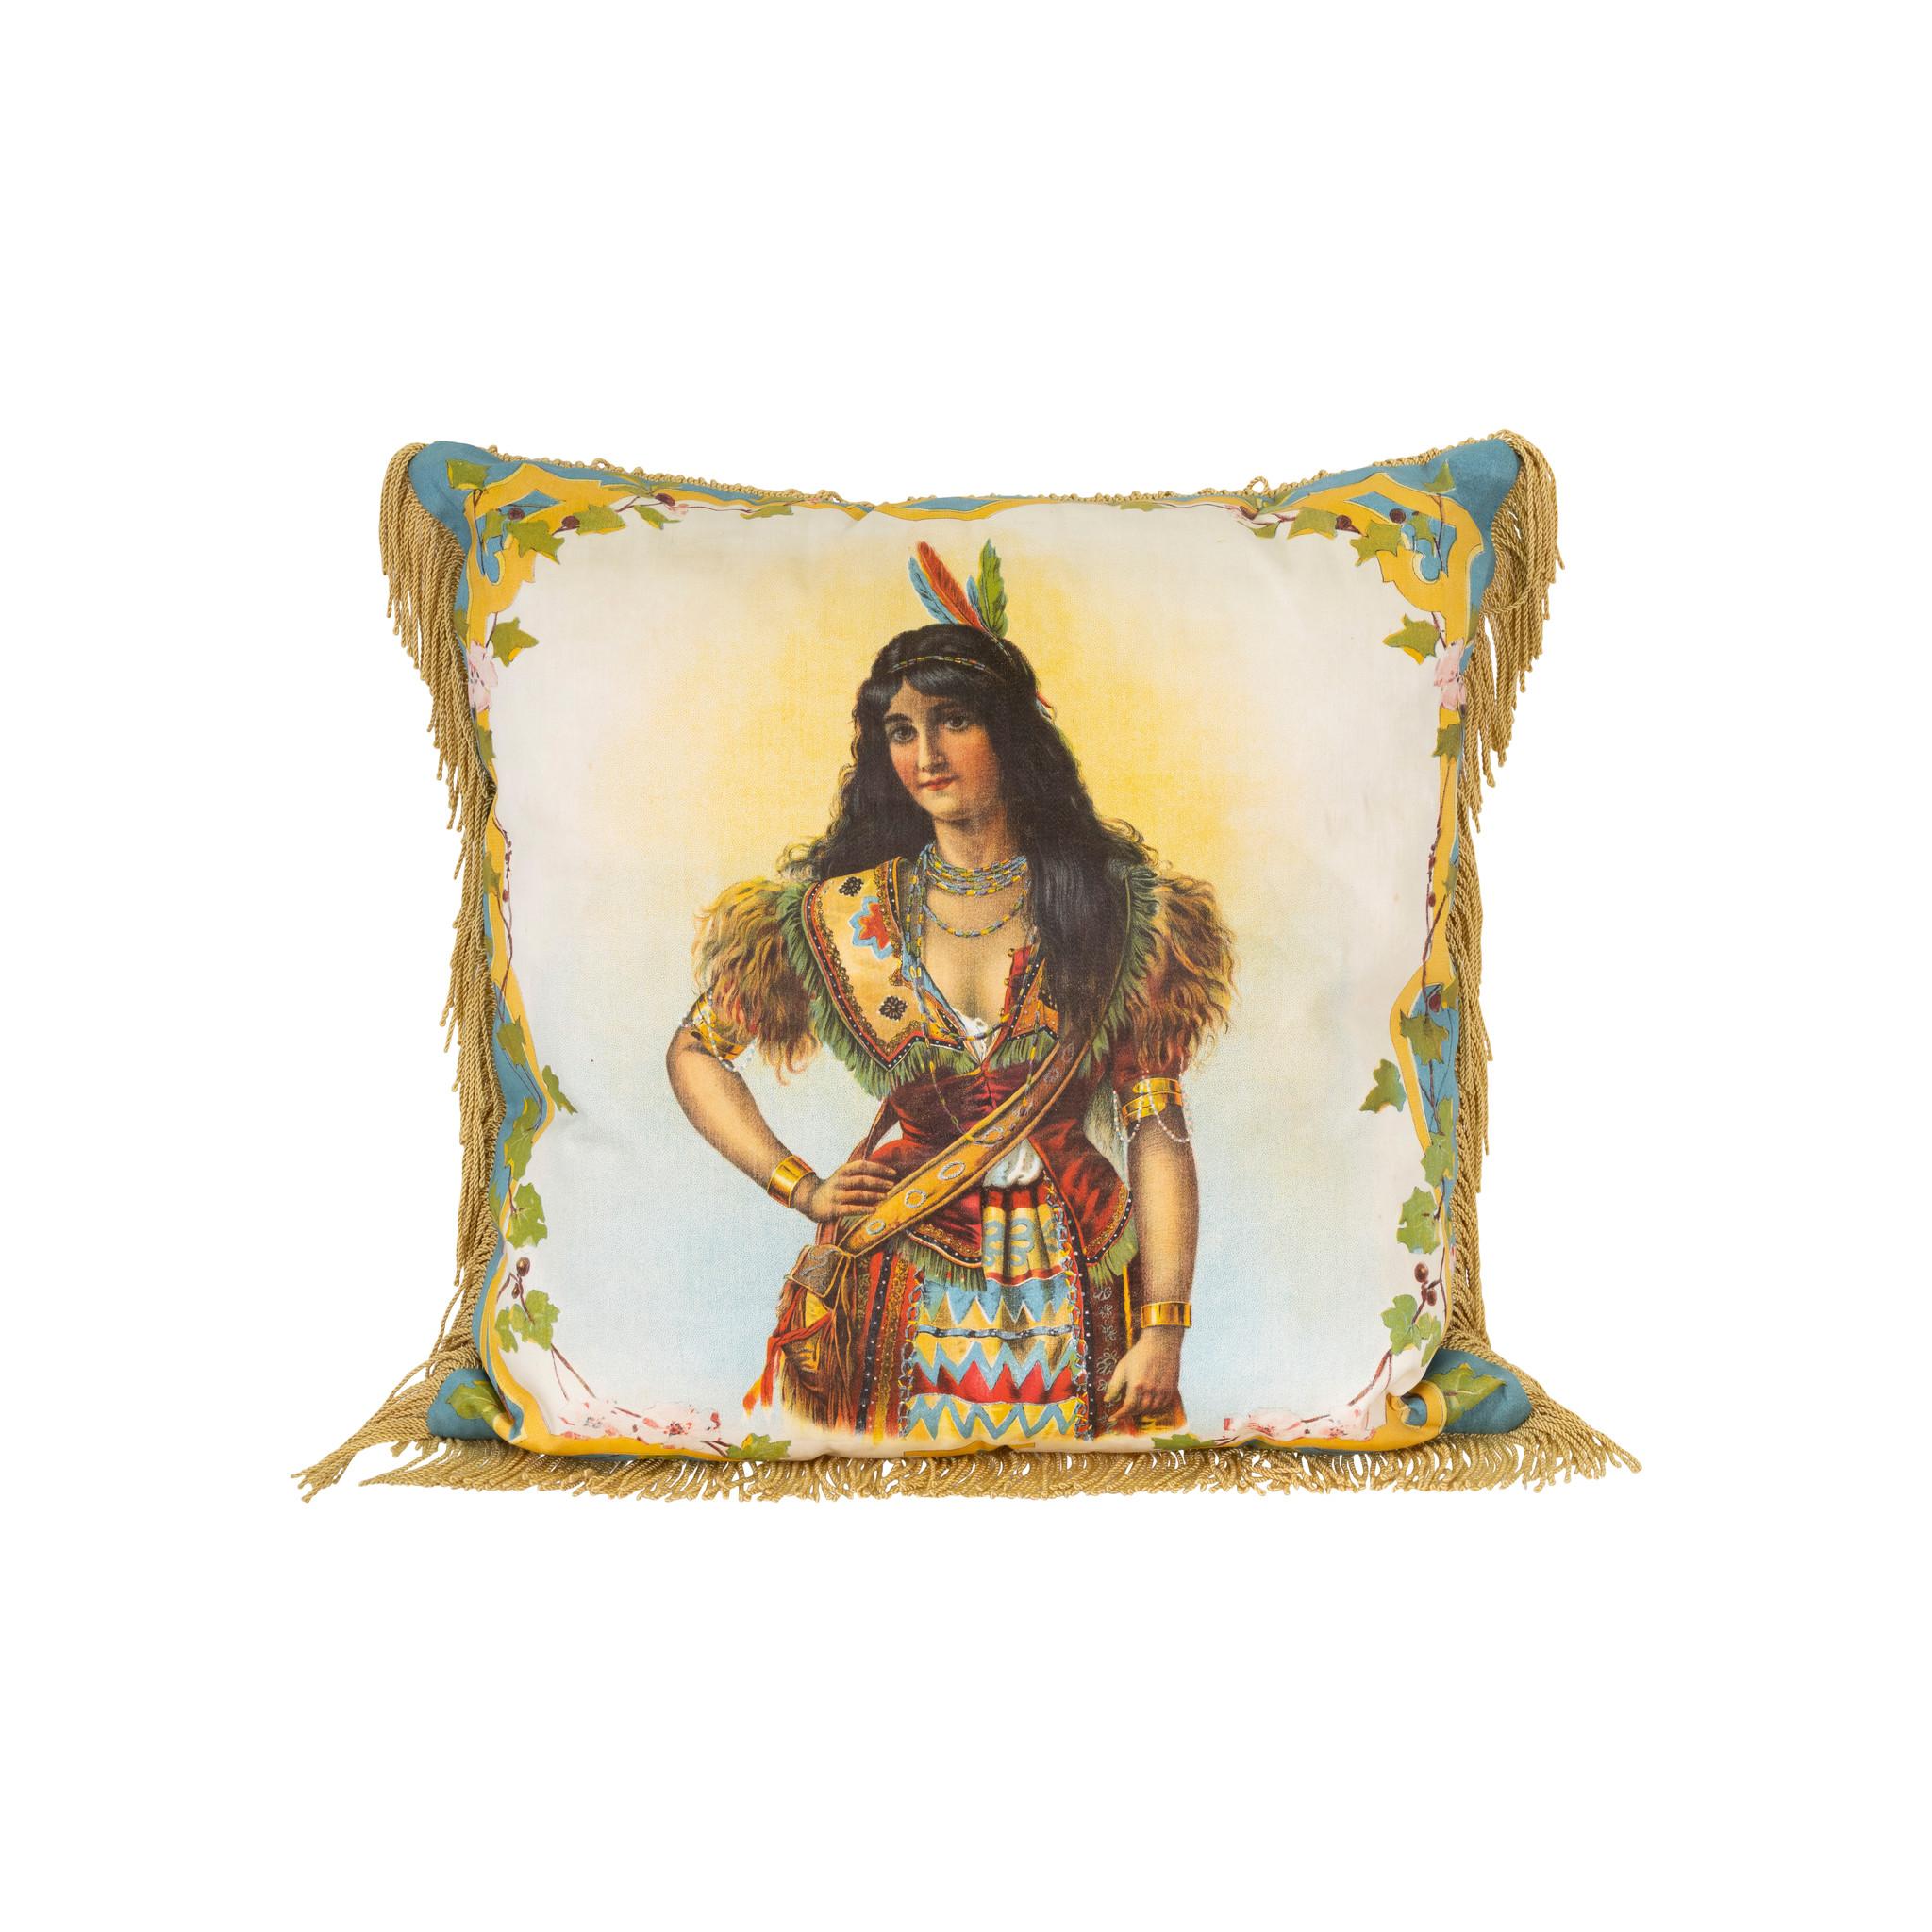 Matched Folk Art Indian Pair Pillows In Good Condition For Sale In Coeur d'Alene, ID